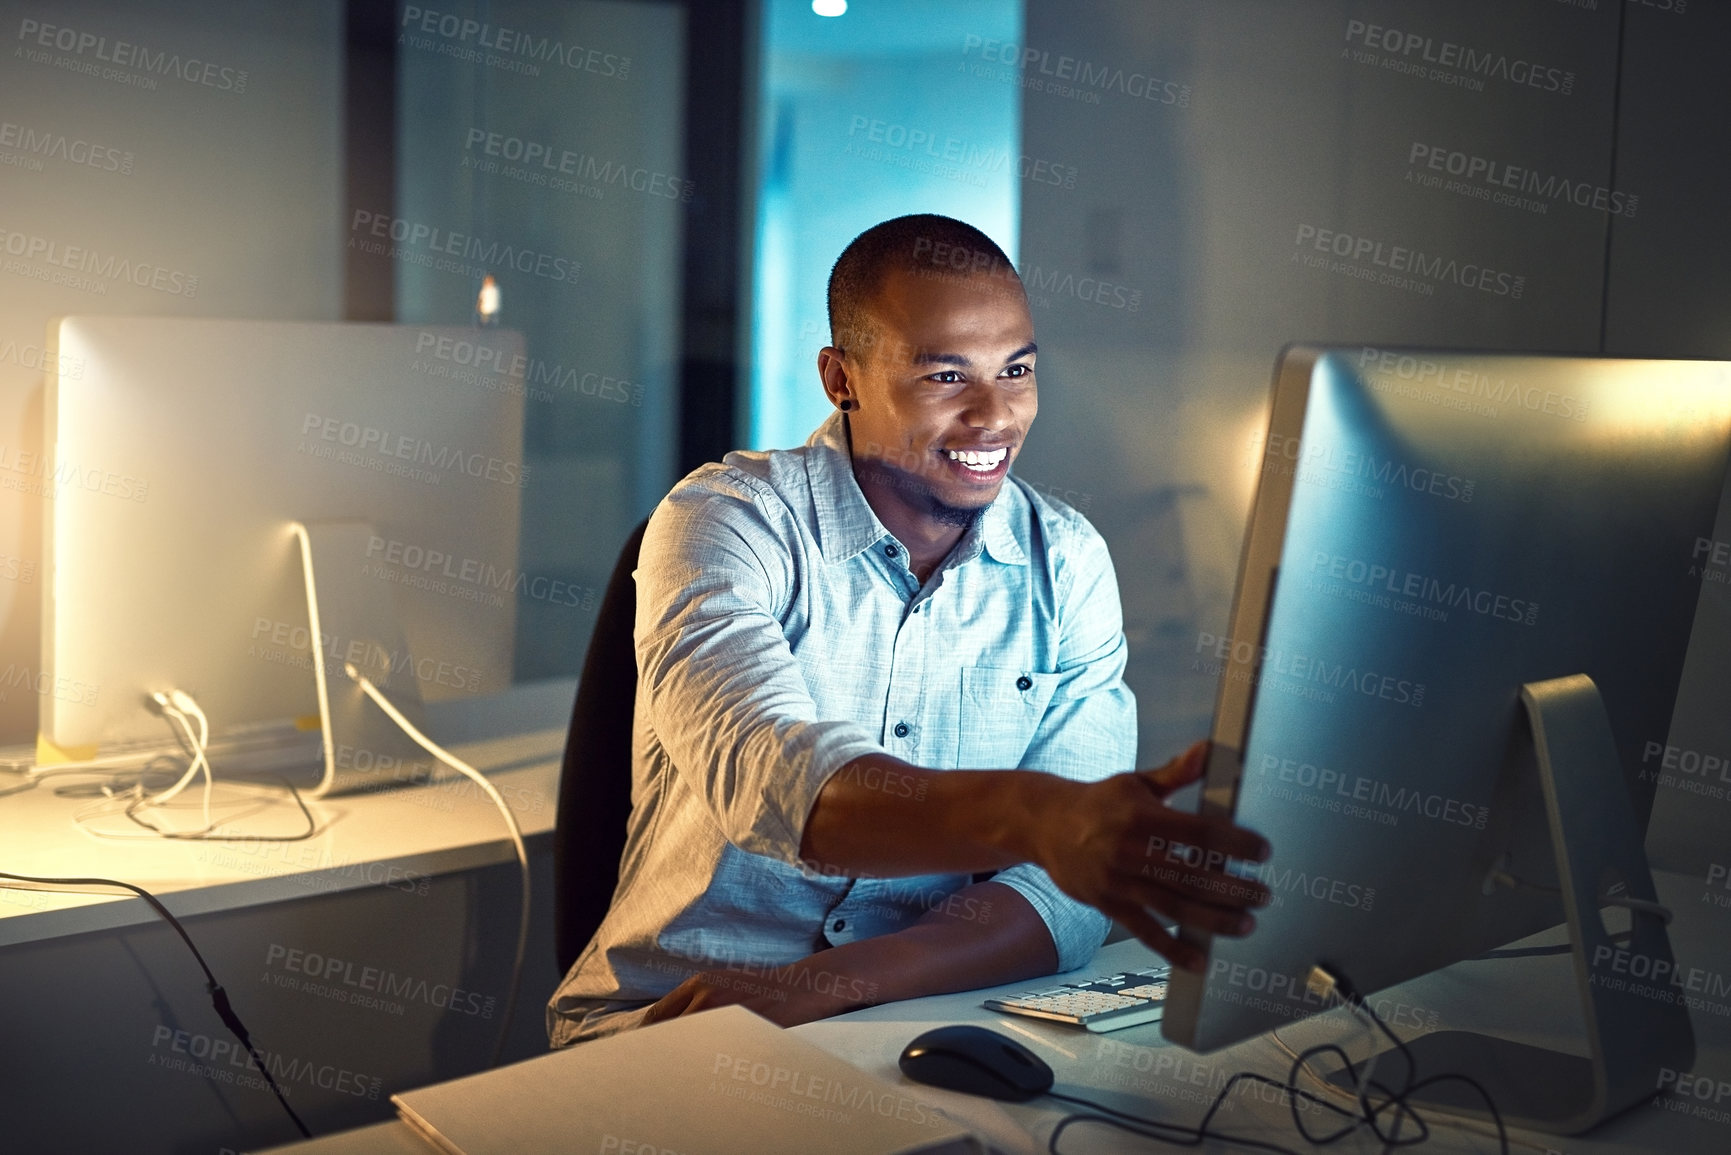 Buy stock photo Shot of a young businessman working late in an office